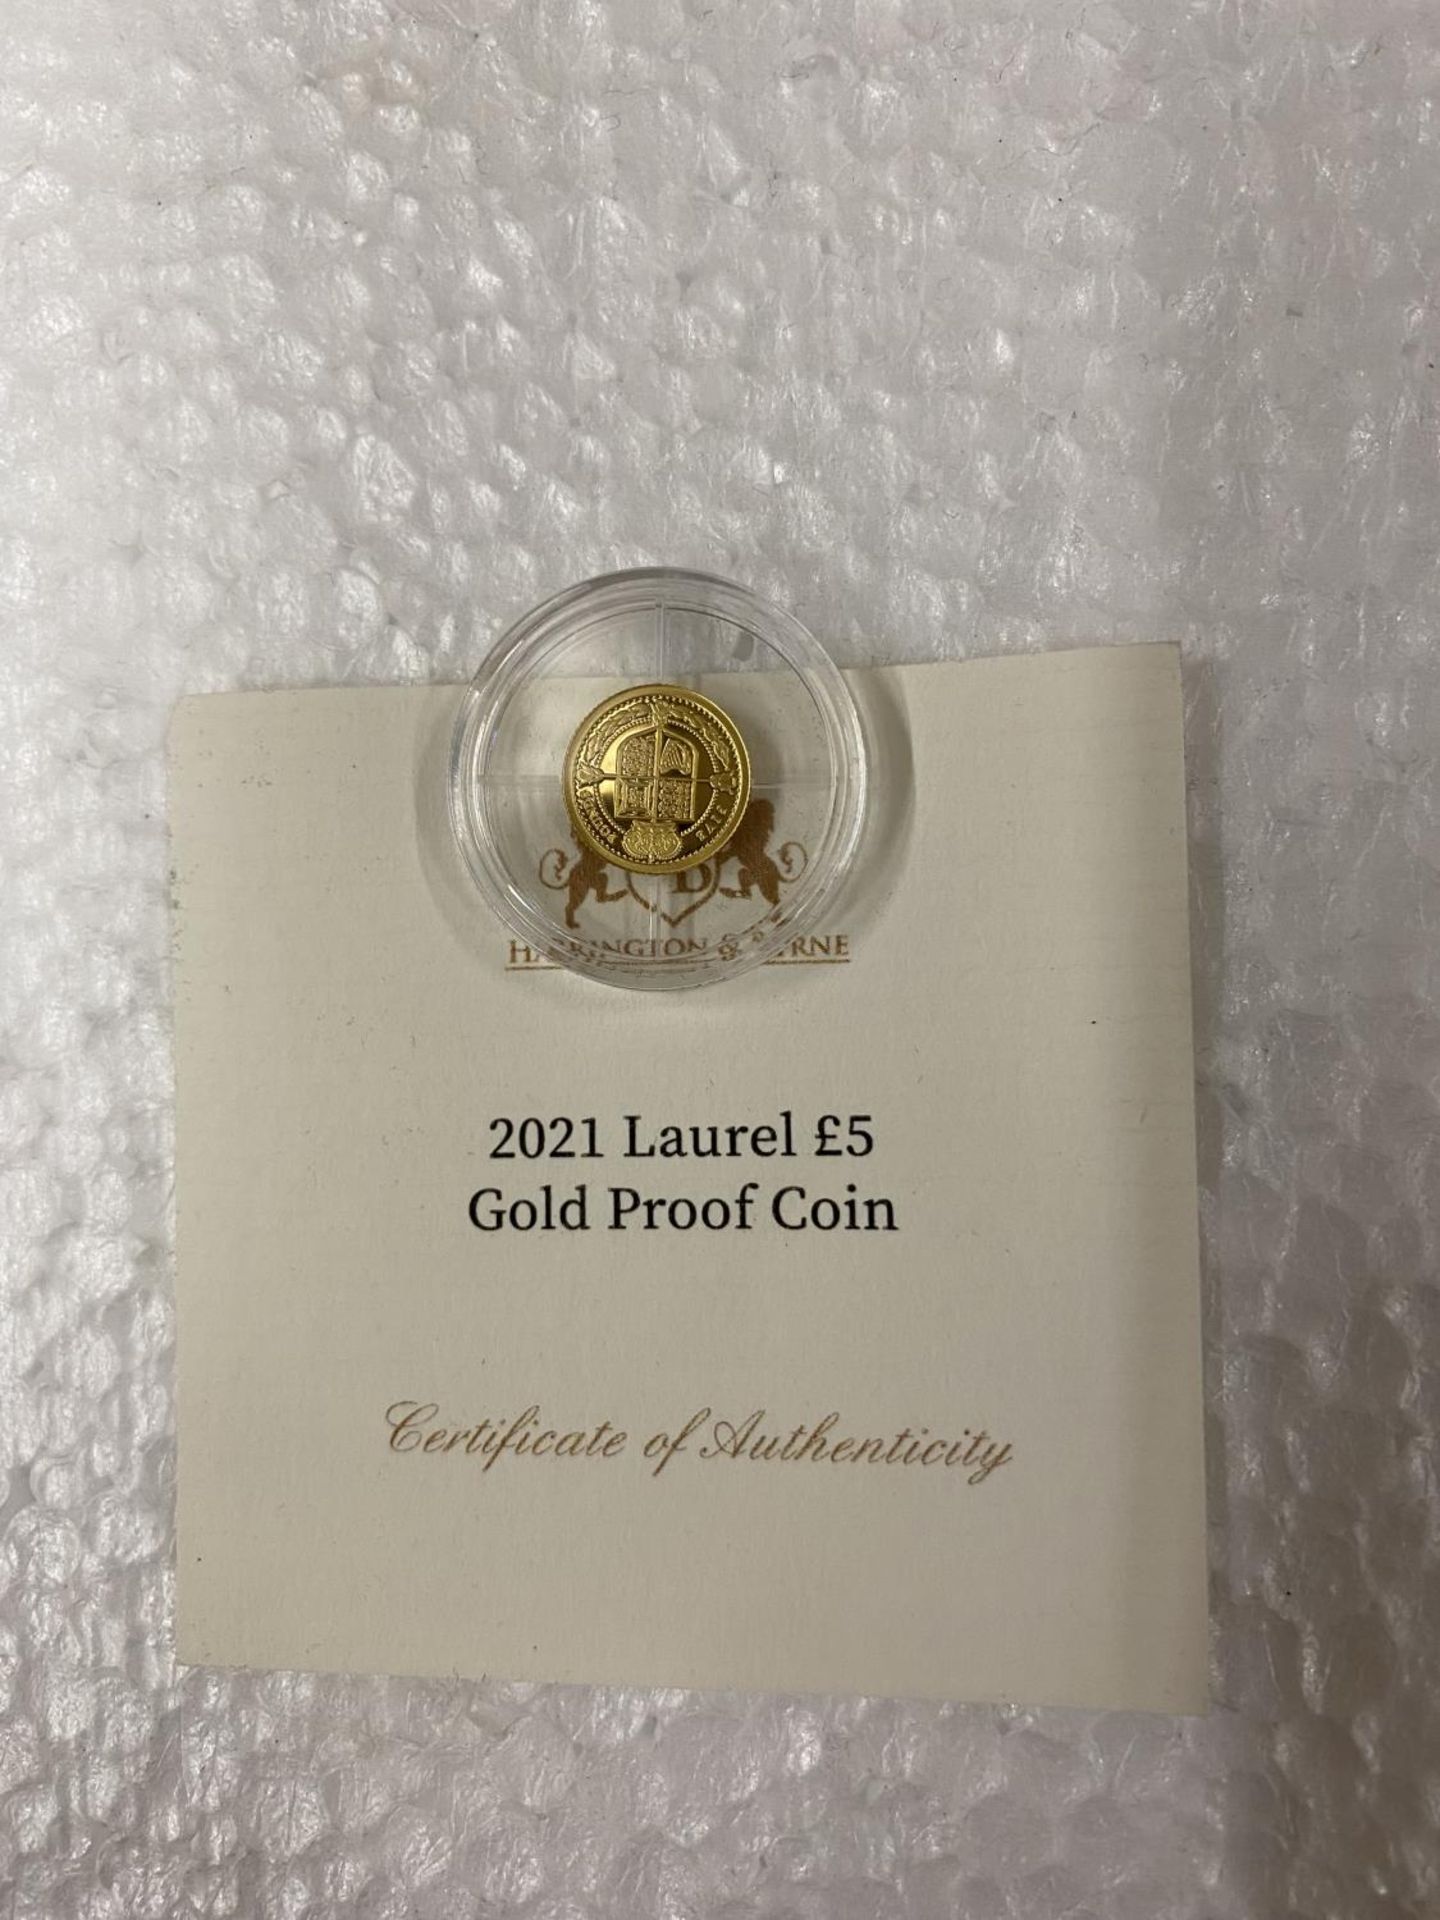 TDC “2021 LAUREL £5” A 24 CARAT GOLD PROOF COIN WITH COA. THE COIN WEIGHS 0.5 GRAMS - Image 2 of 3